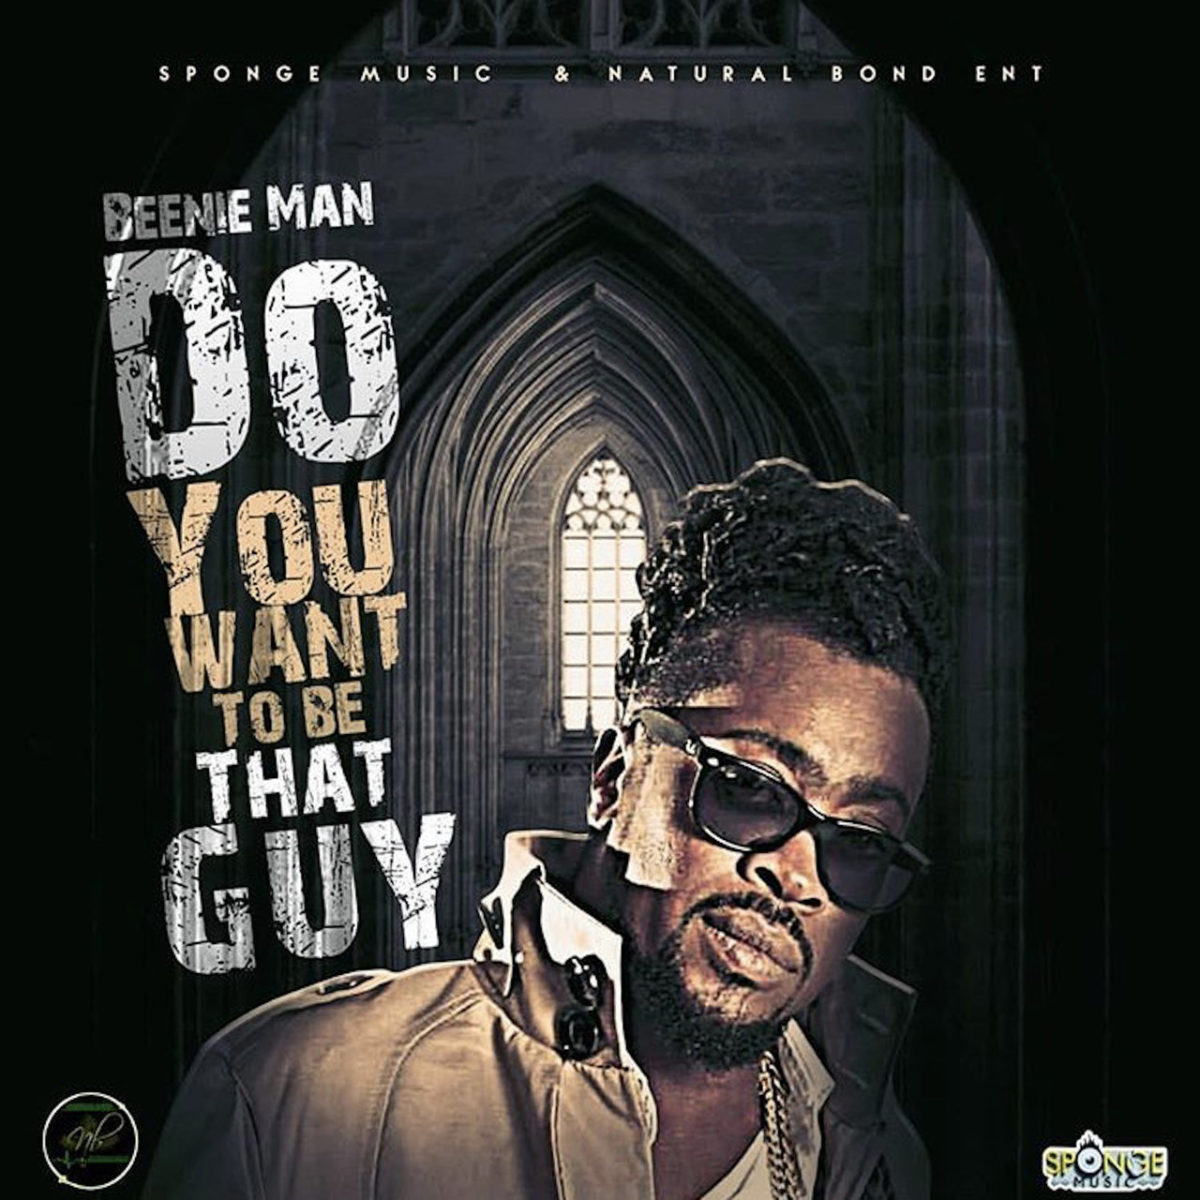 Beenie Man - Do You Want To Be That Guy (Cover)